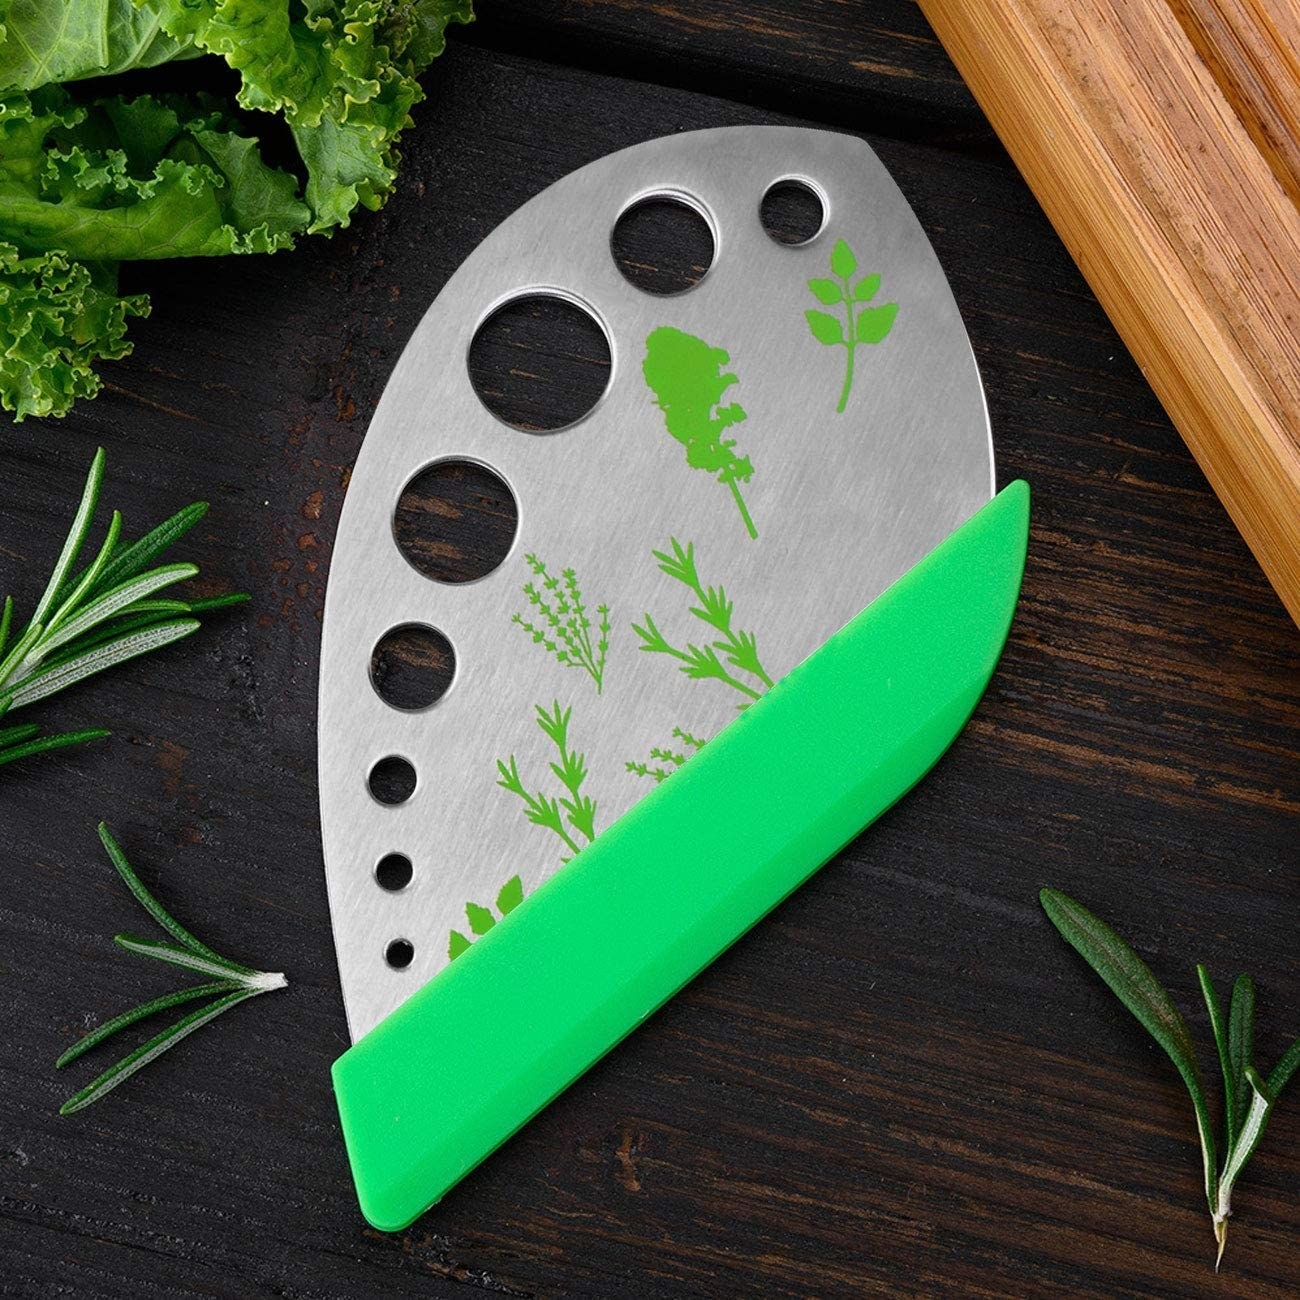 the herb stripper on a table surrounded by various herbs